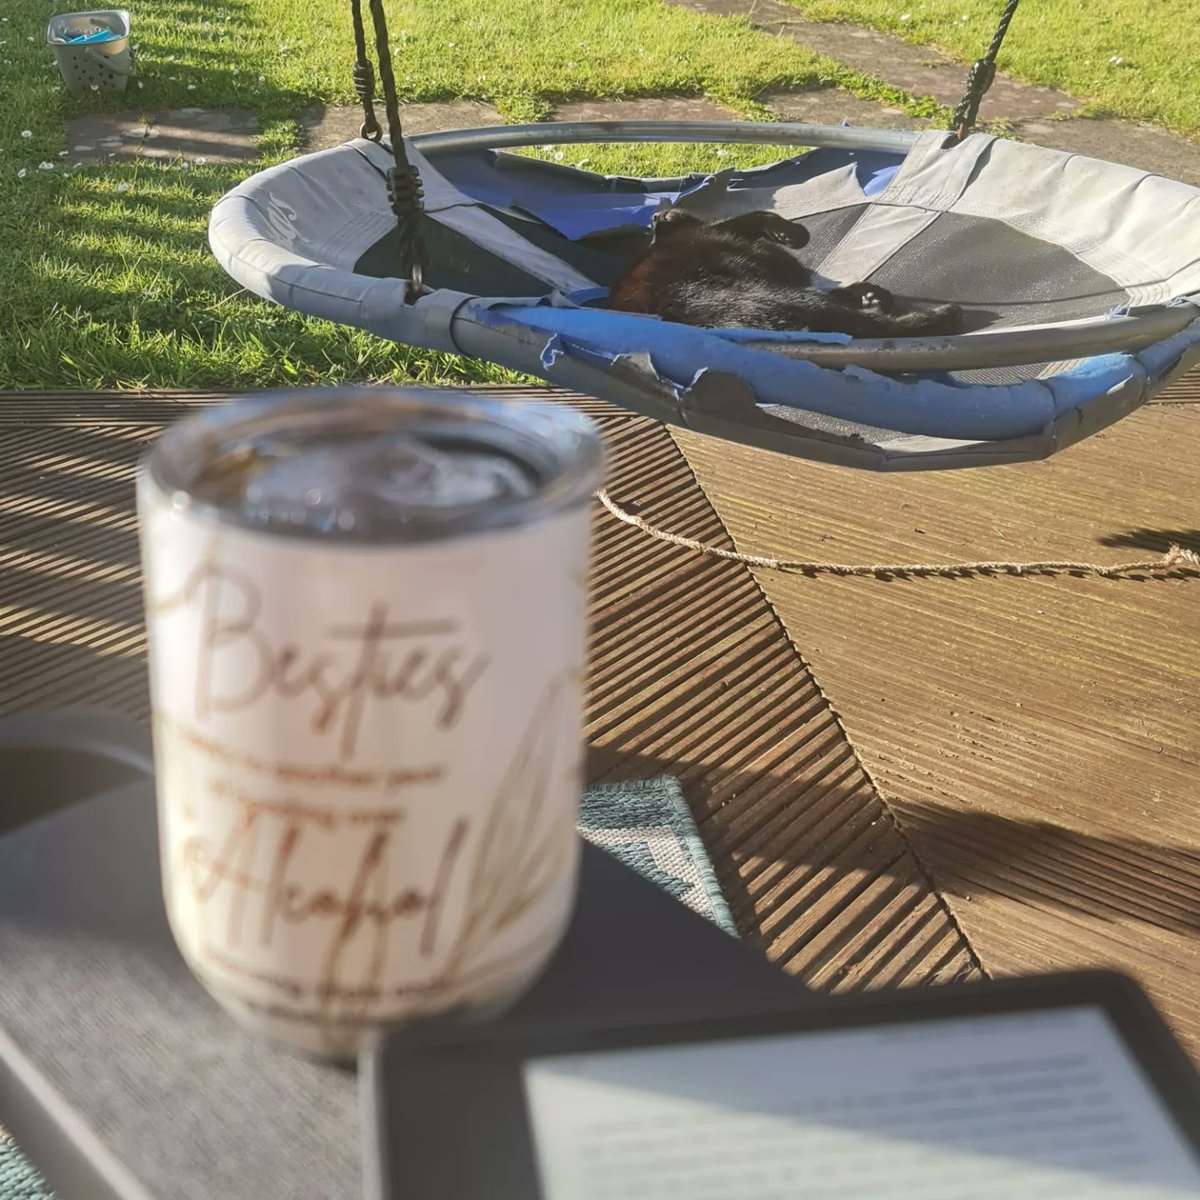 Exactly what was needed after the day I've had. 

Book
Cocktail
Sunshine
Cat on the swing

#BlossyLouCreations #winetumblers #sunshine #relax #wierdcat